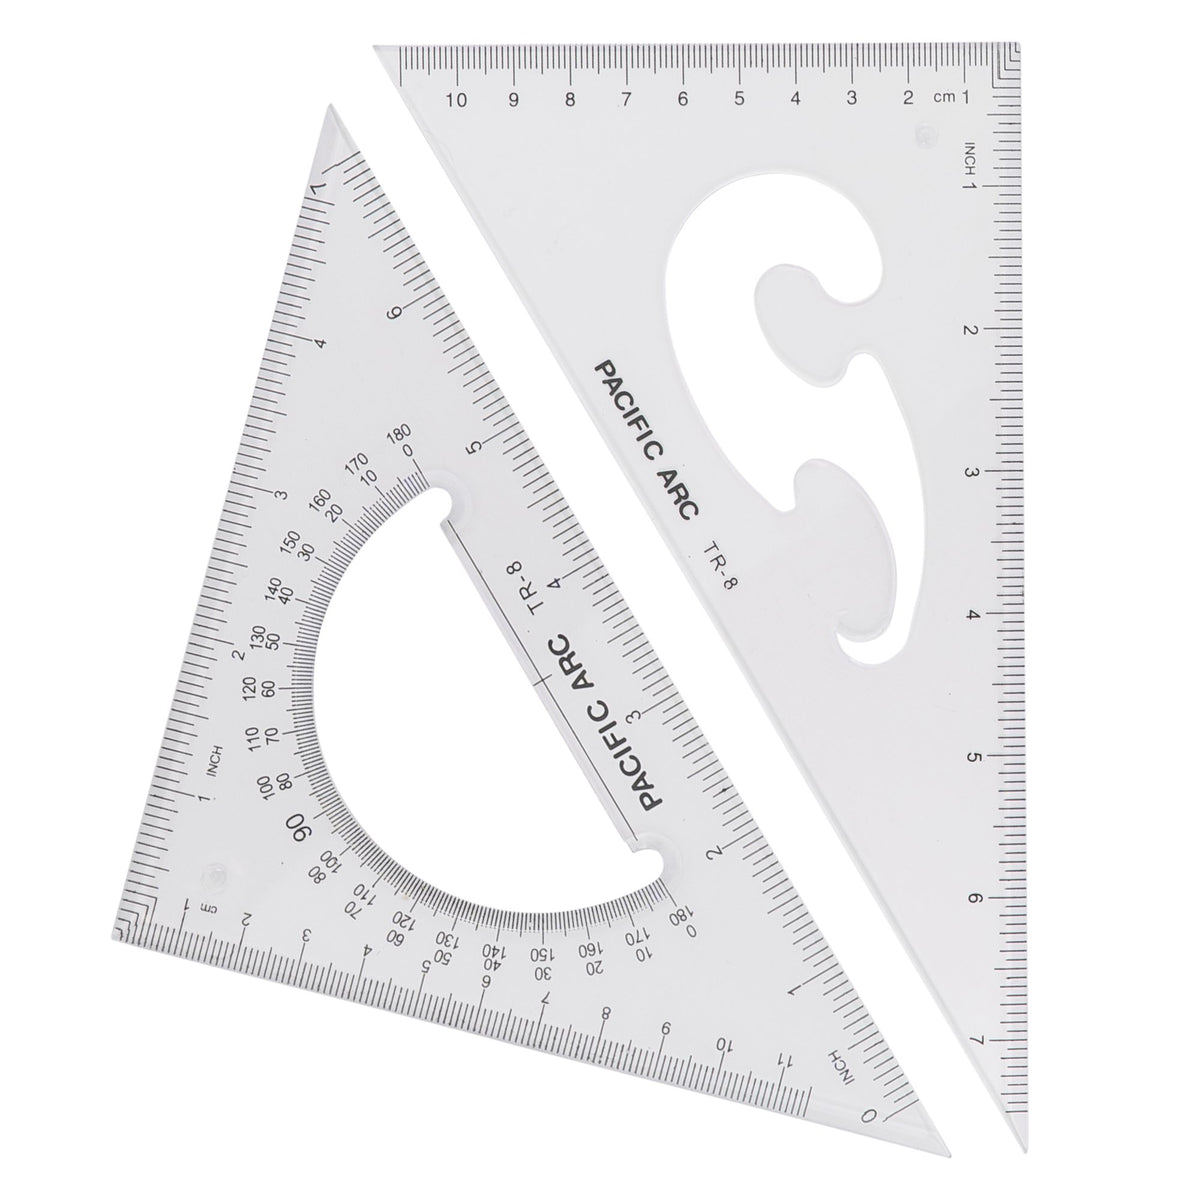 Pacific Arc Stainless Steel Ruler – Inch and Pica (EP)